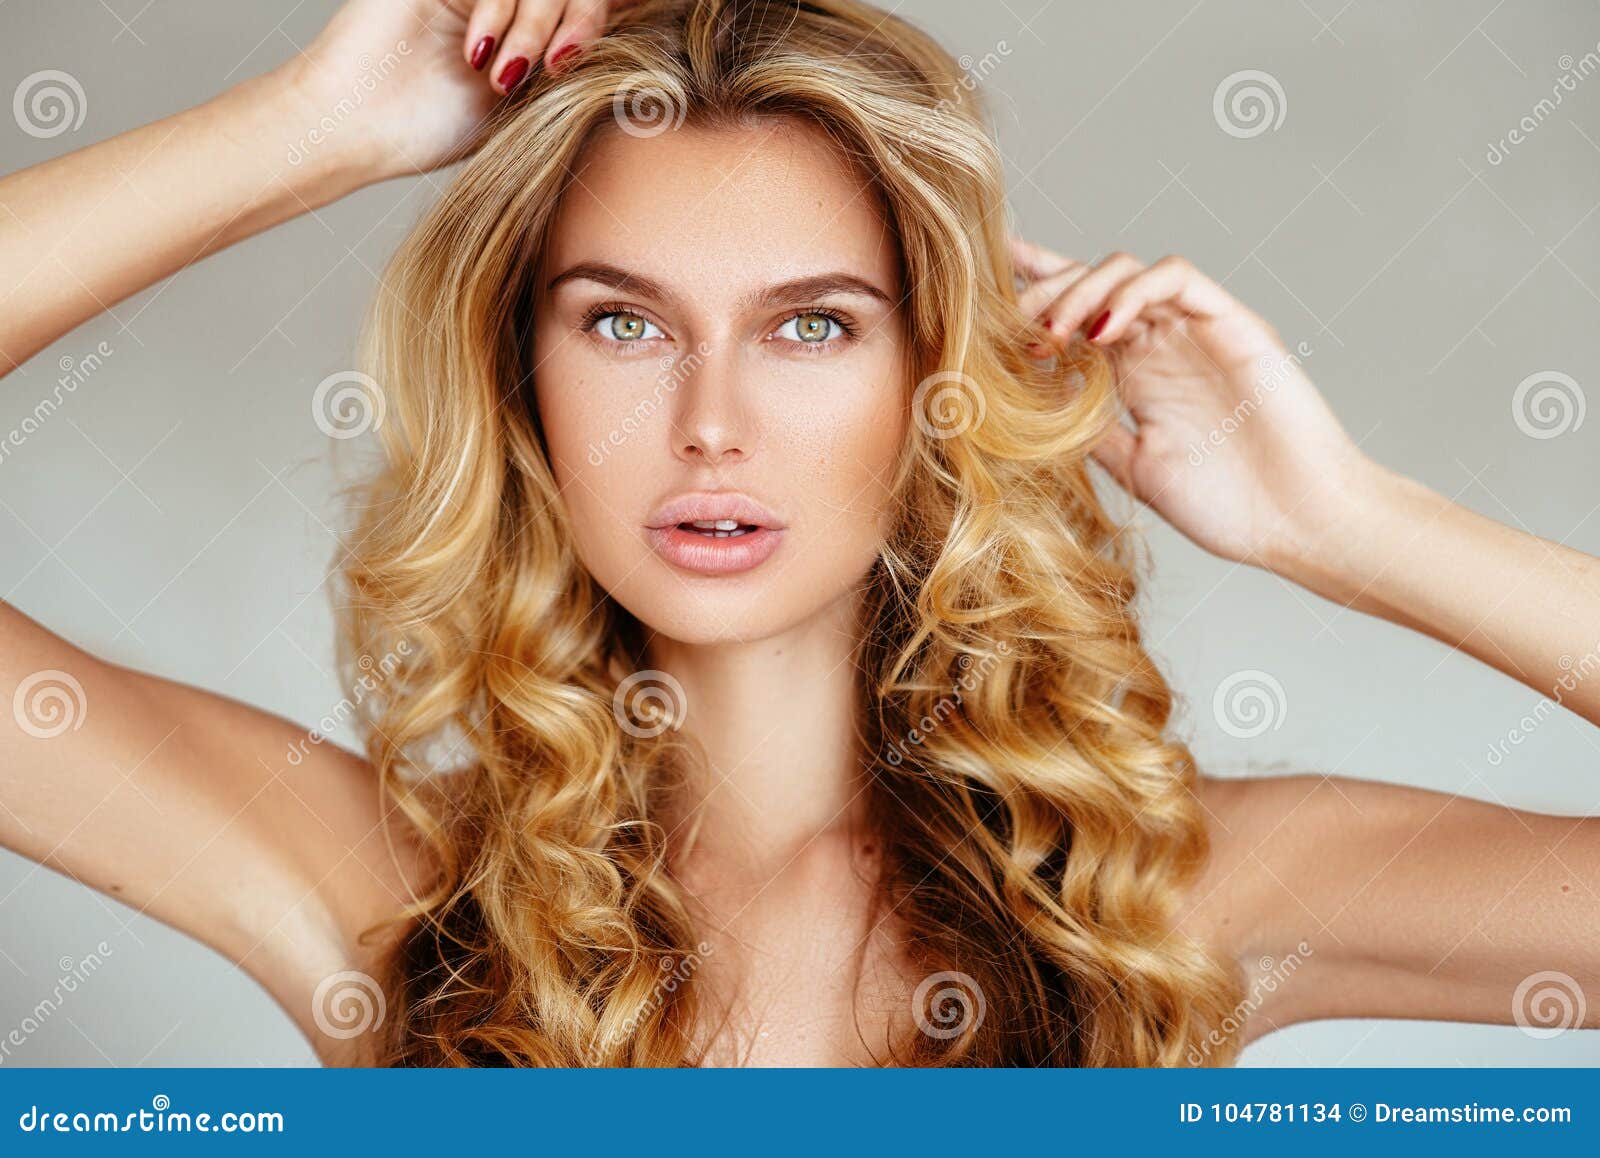 Beautiful Tender Blonde Girl With Long Hair And Puffy Lips Without Makeup Posing In Pink